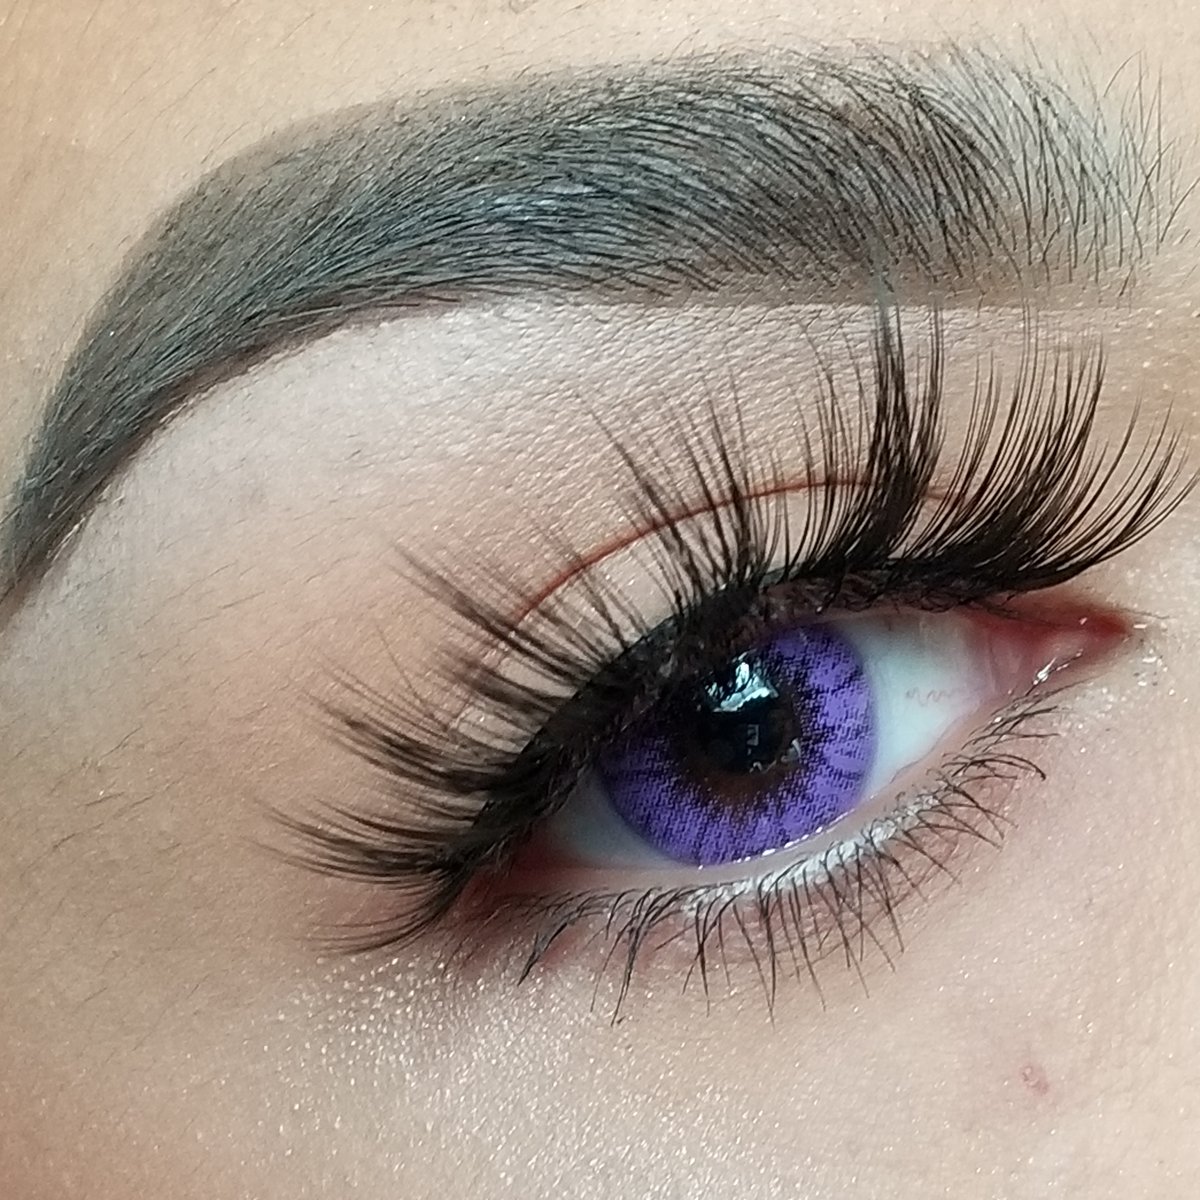 Violet contacts